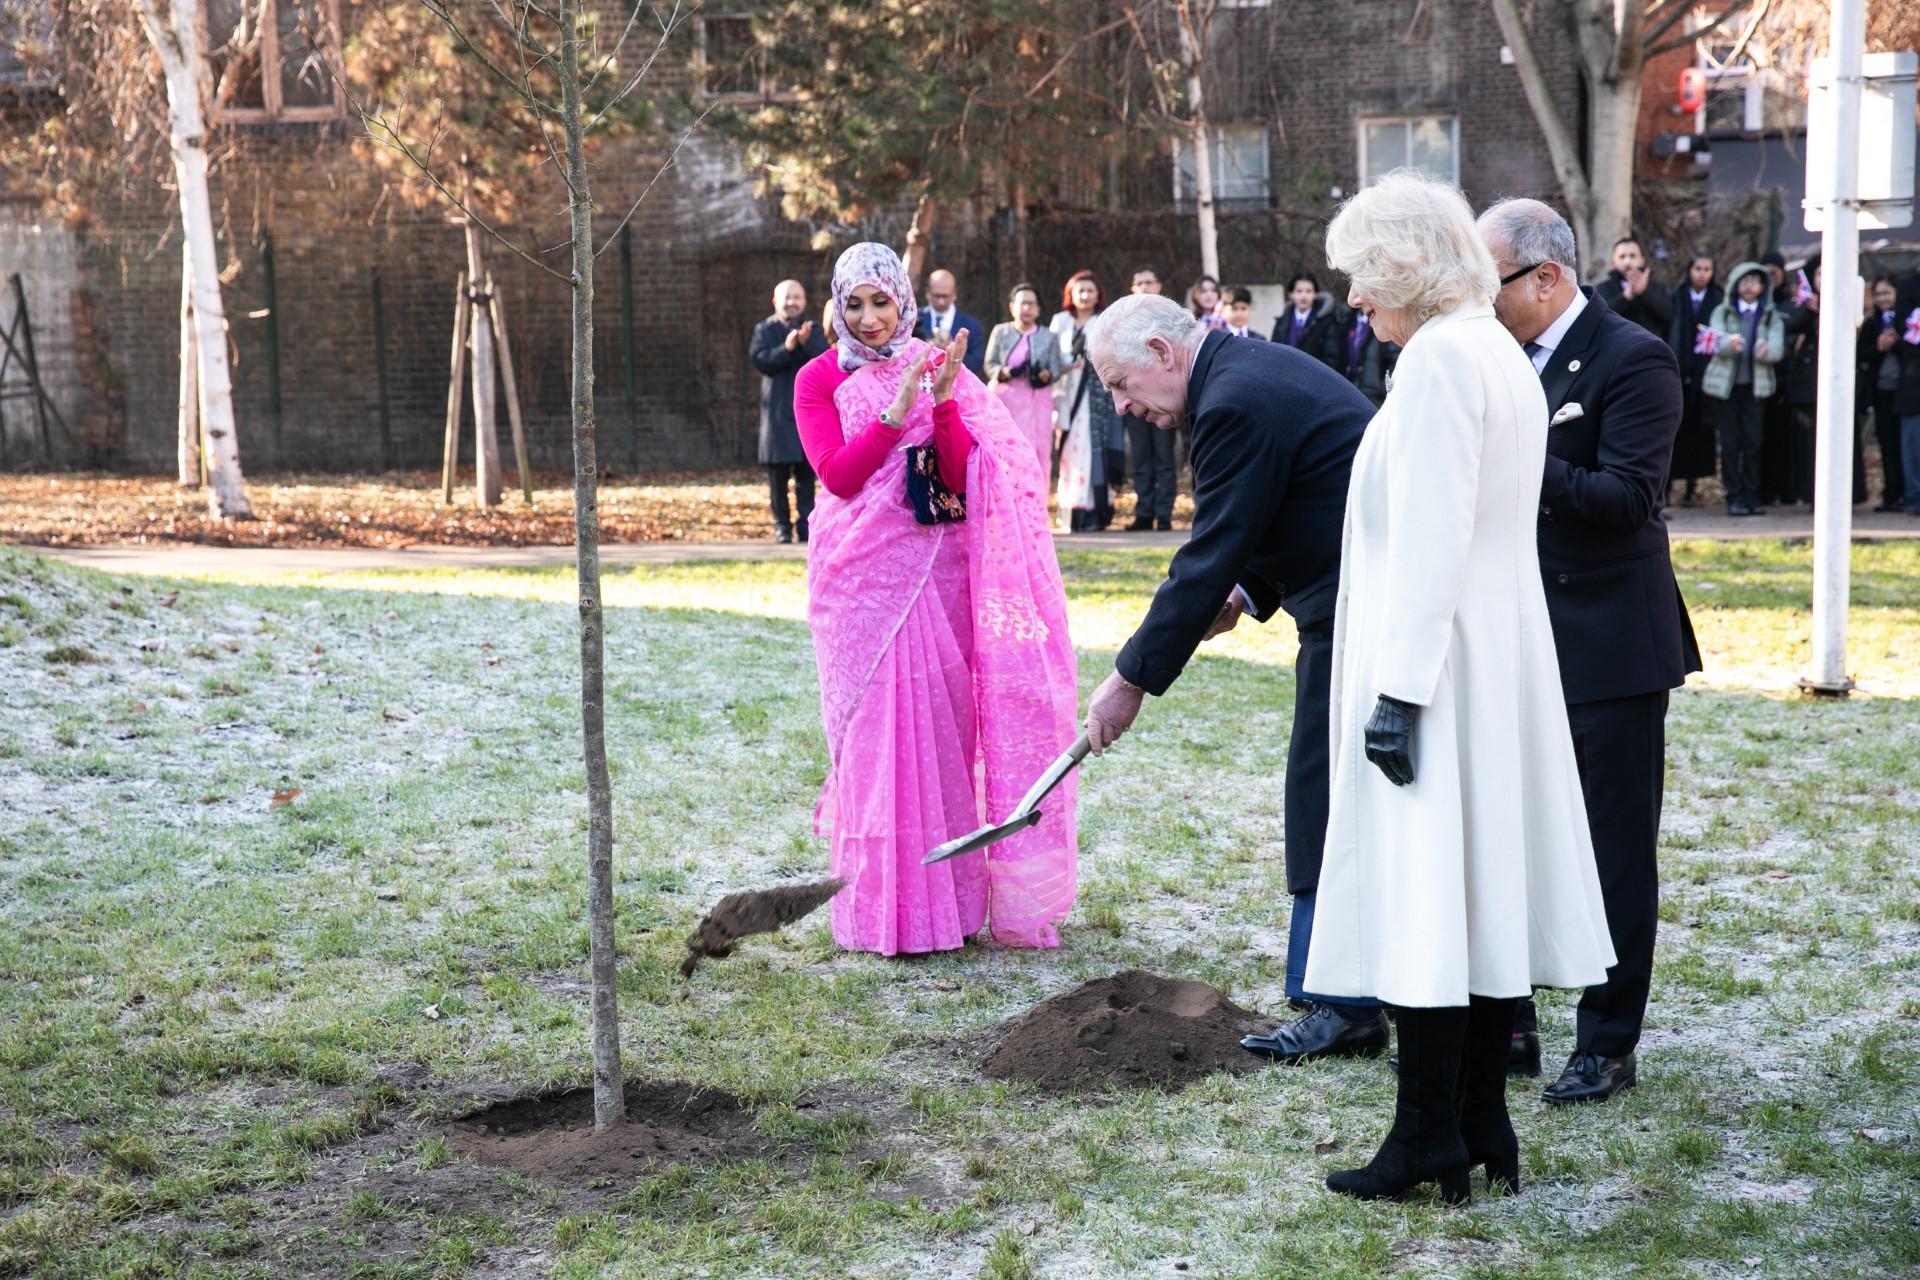 Tree planted by His Majesty The King